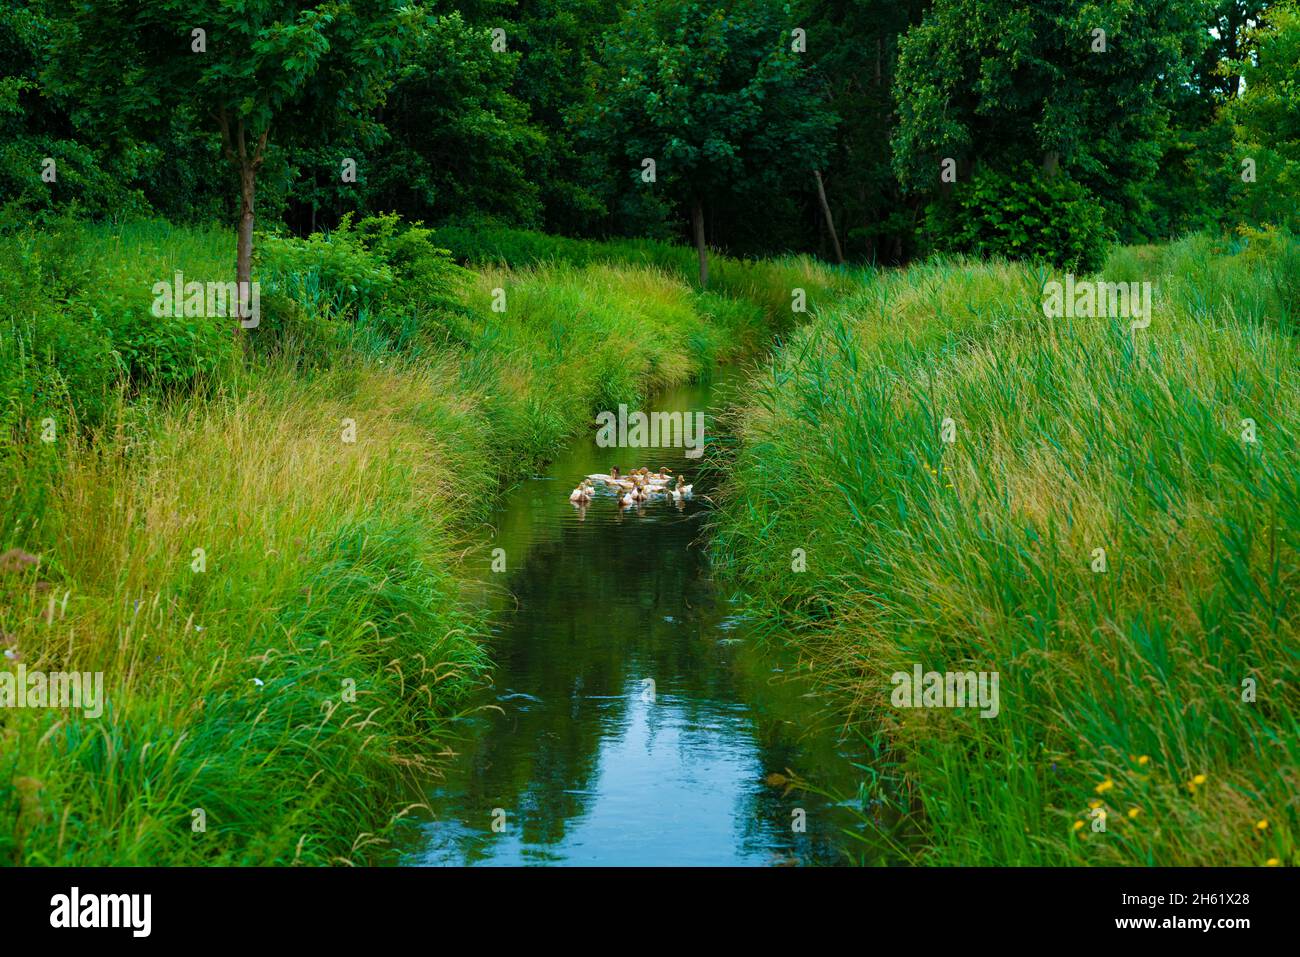 small narrow river with a large family of ducks in the water Stock Photo